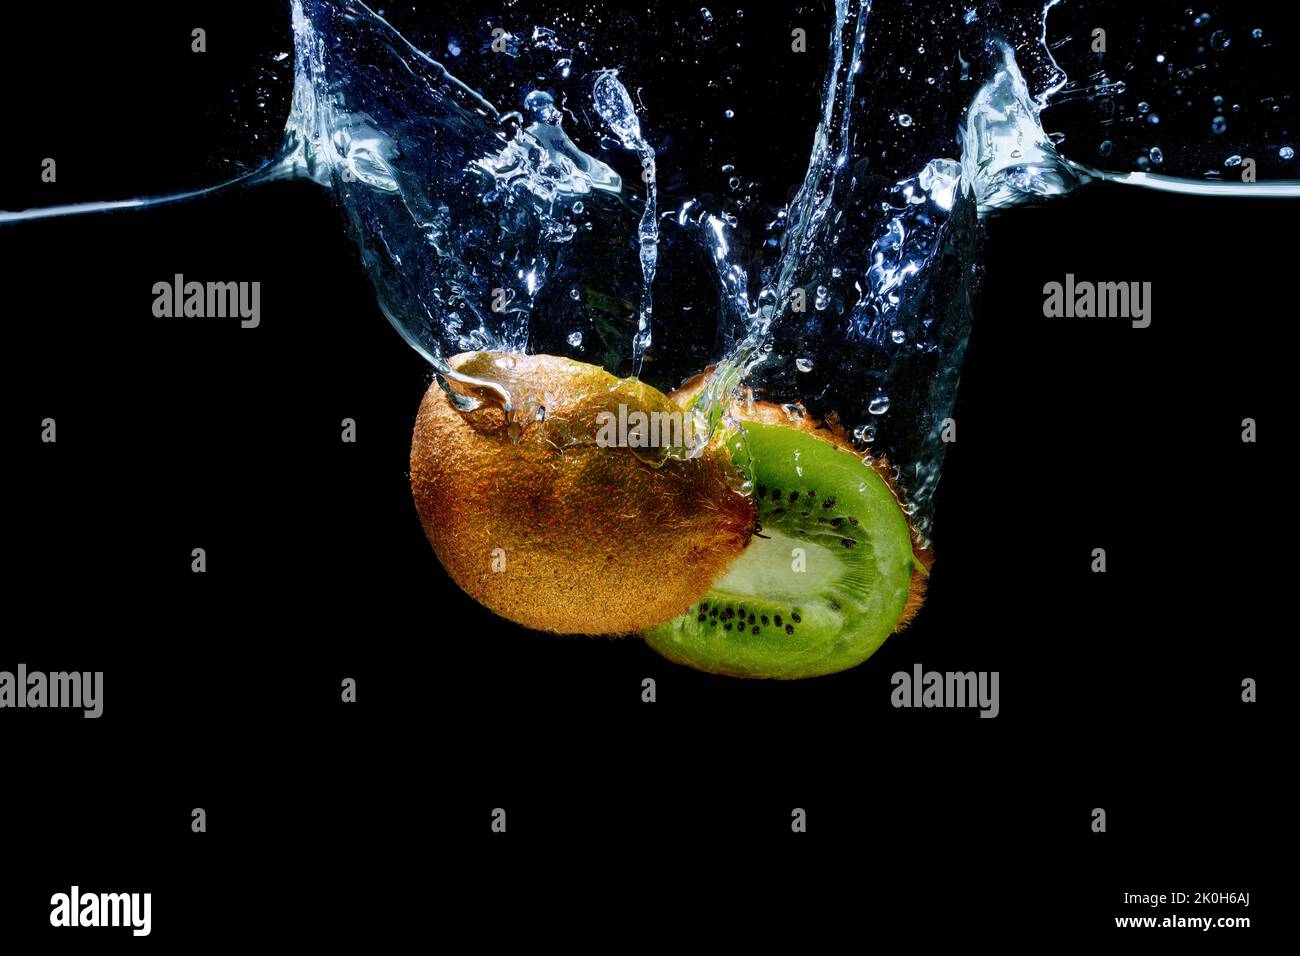 Cut-in-half kiwifruit dropped in water with splashes isolated on black background Stock Photo